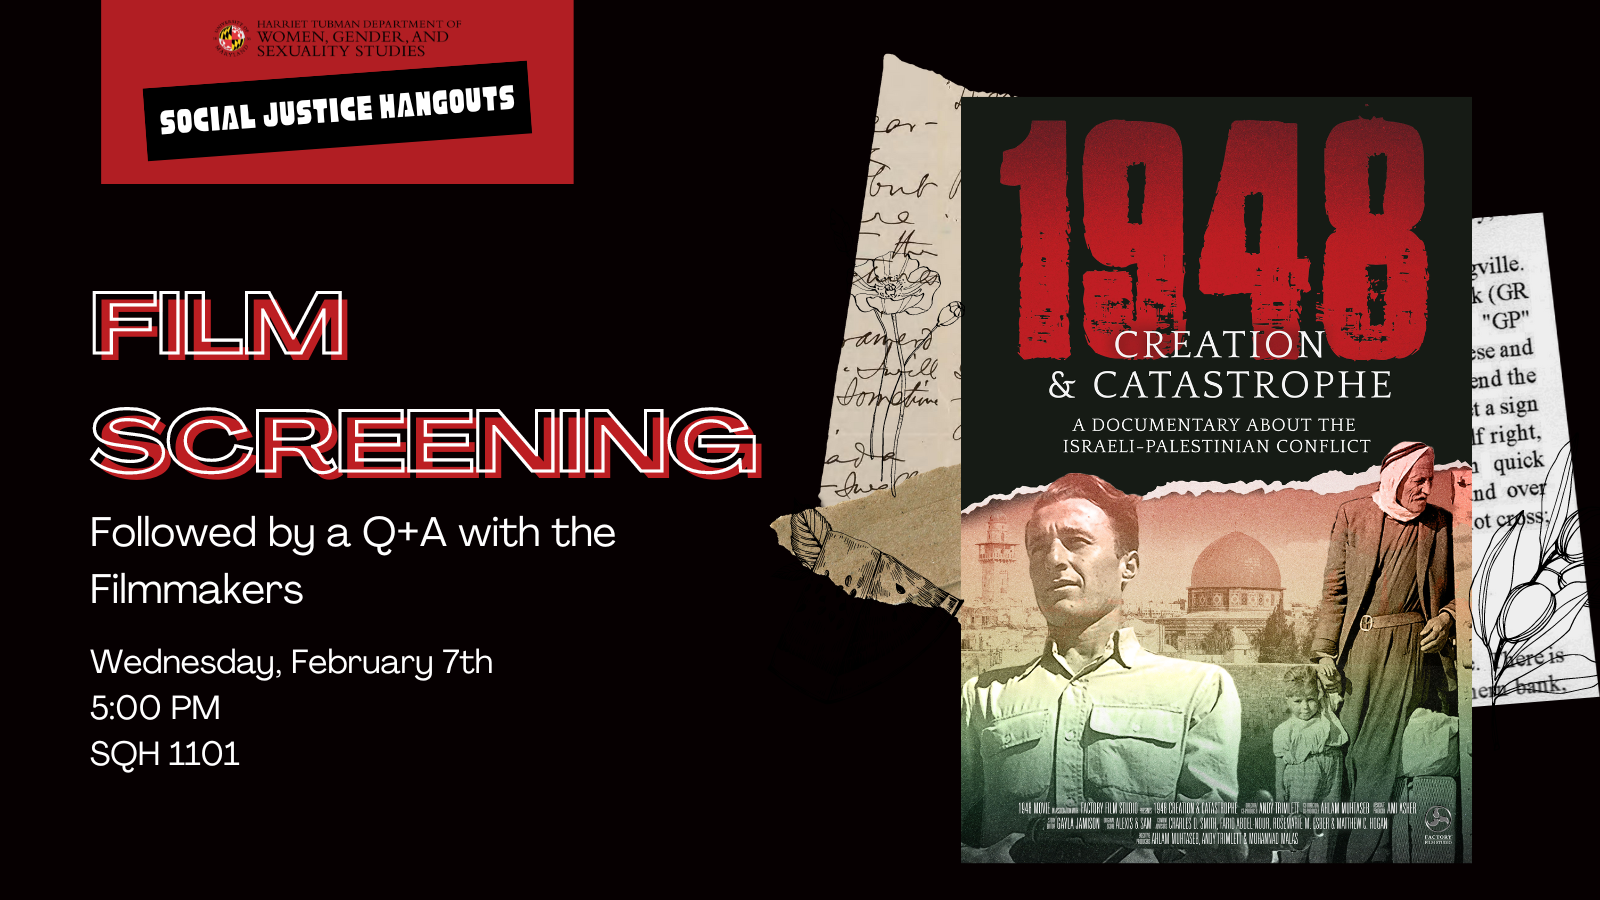 Photo of the cover for the documentary 1948 along with the title for the Social Justice Hangout Film Screening